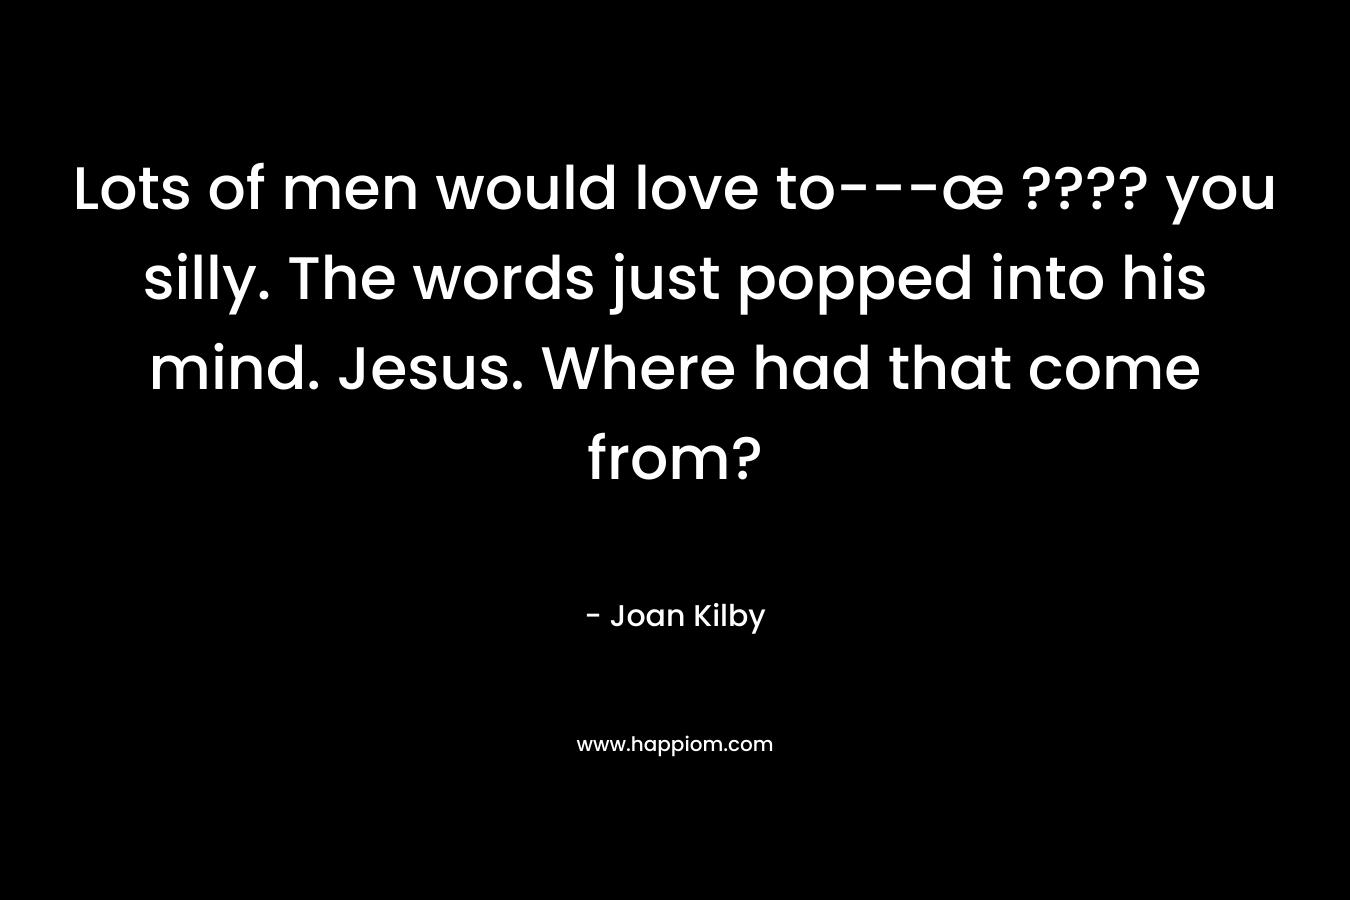 Lots of men would love to—œ ???? you silly. The words just popped into his mind. Jesus. Where had that come from? – Joan Kilby